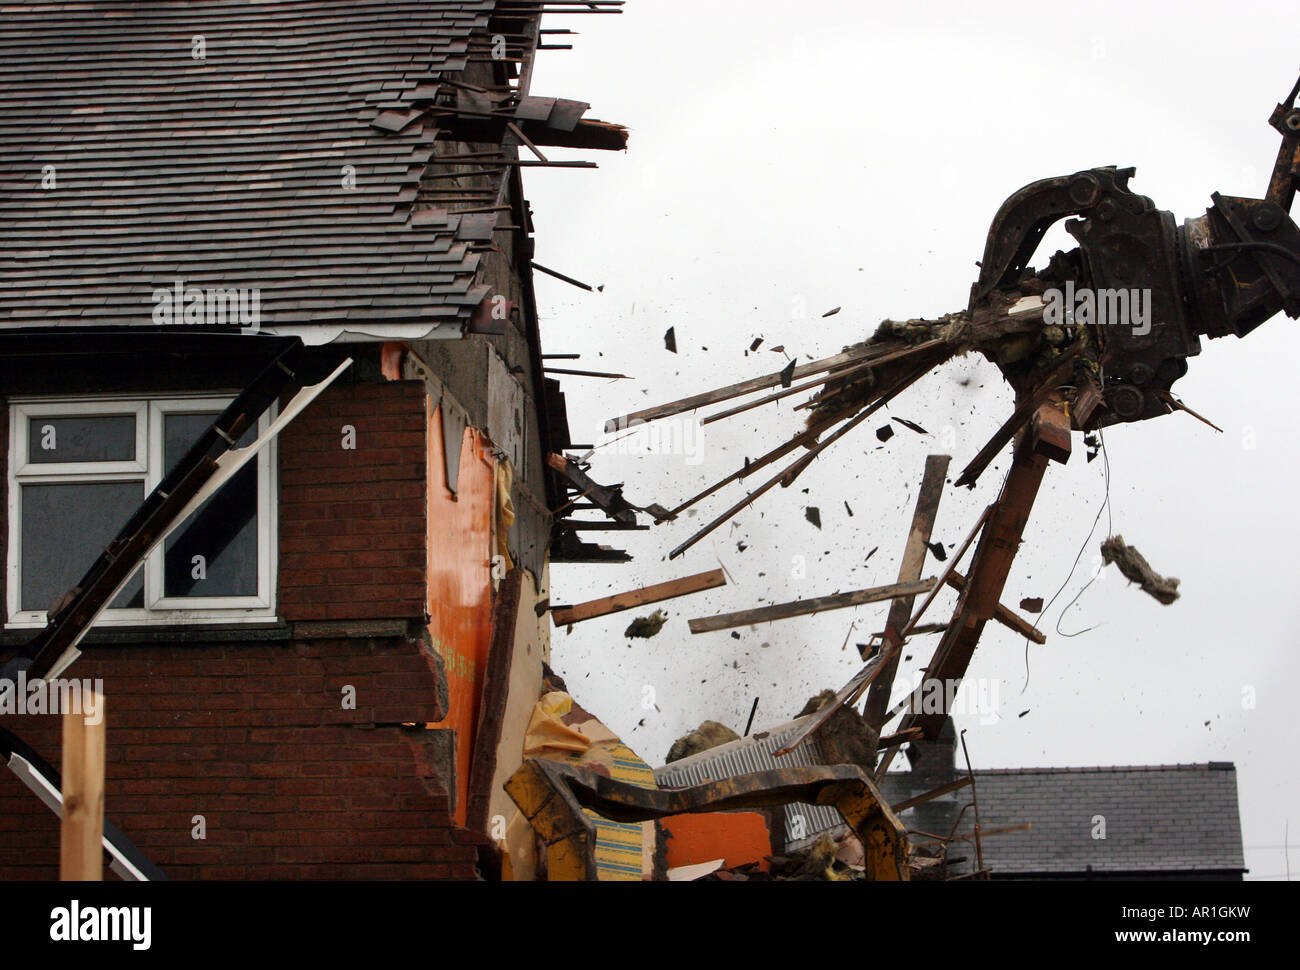 A UK house is demolished as the roof is ripped off in the UK.The UK Government stand accused of inflating house prices Stock Photo